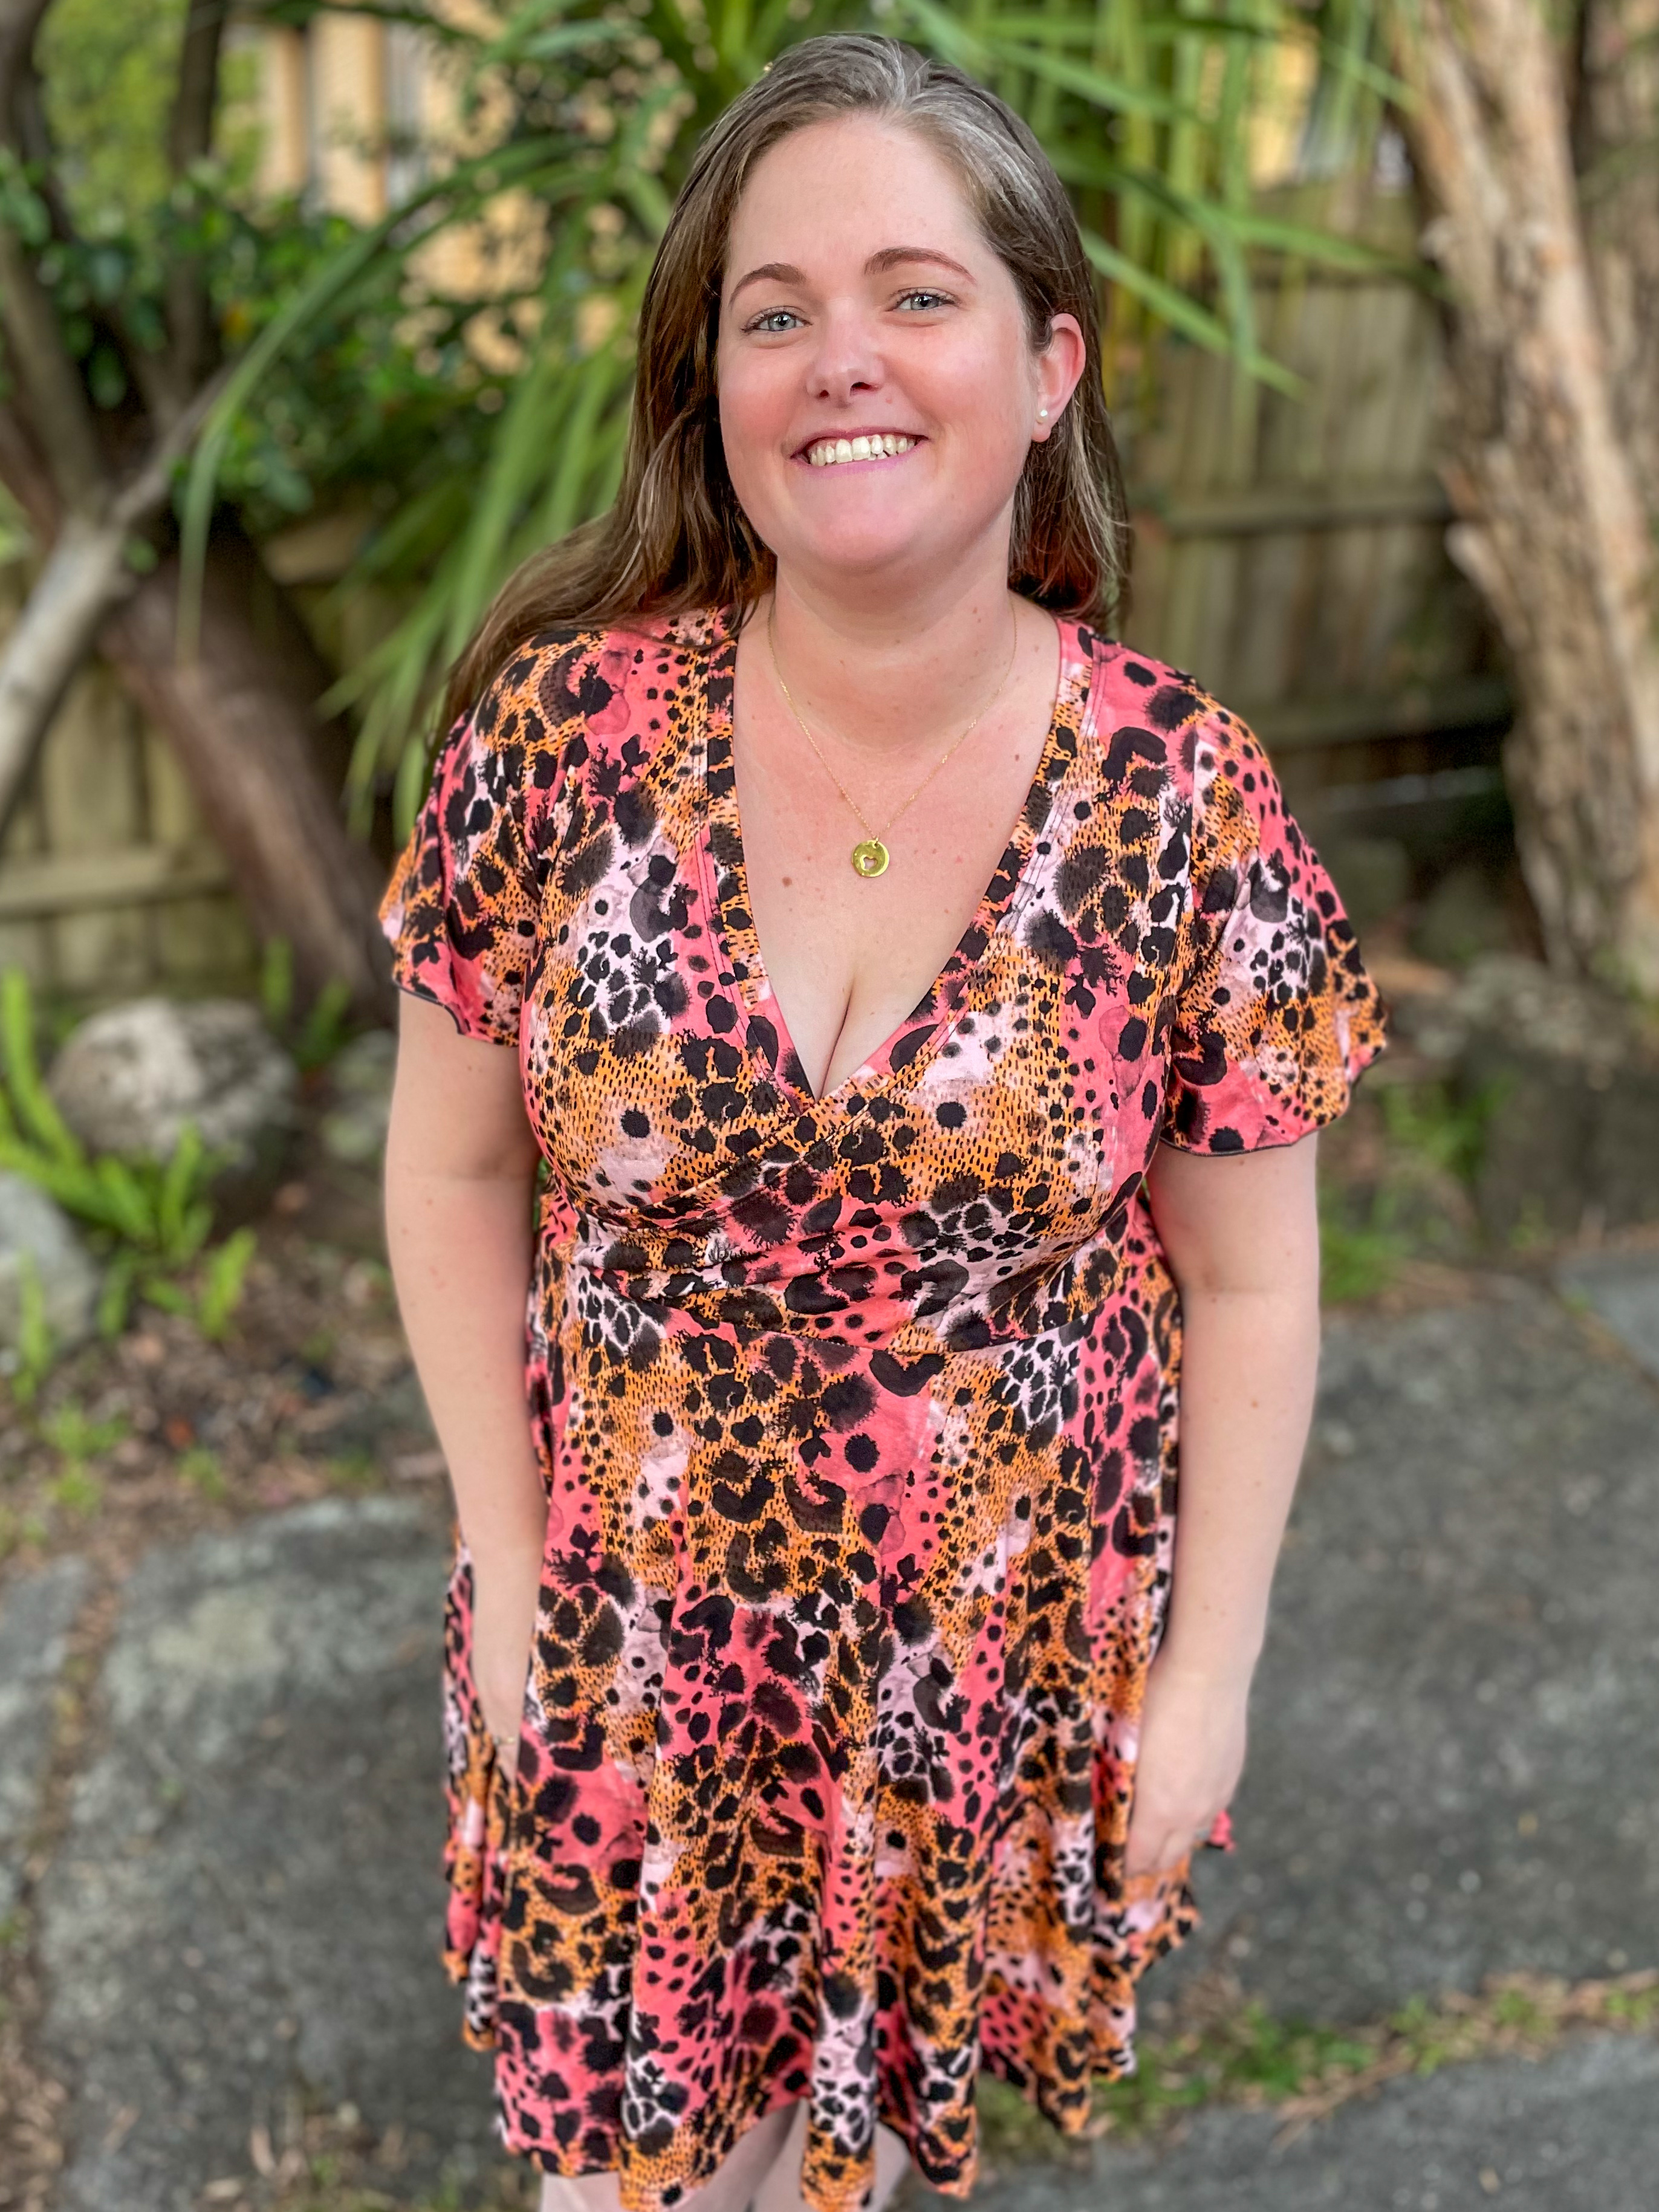 Leopard print dress adds flair to woman's photo.